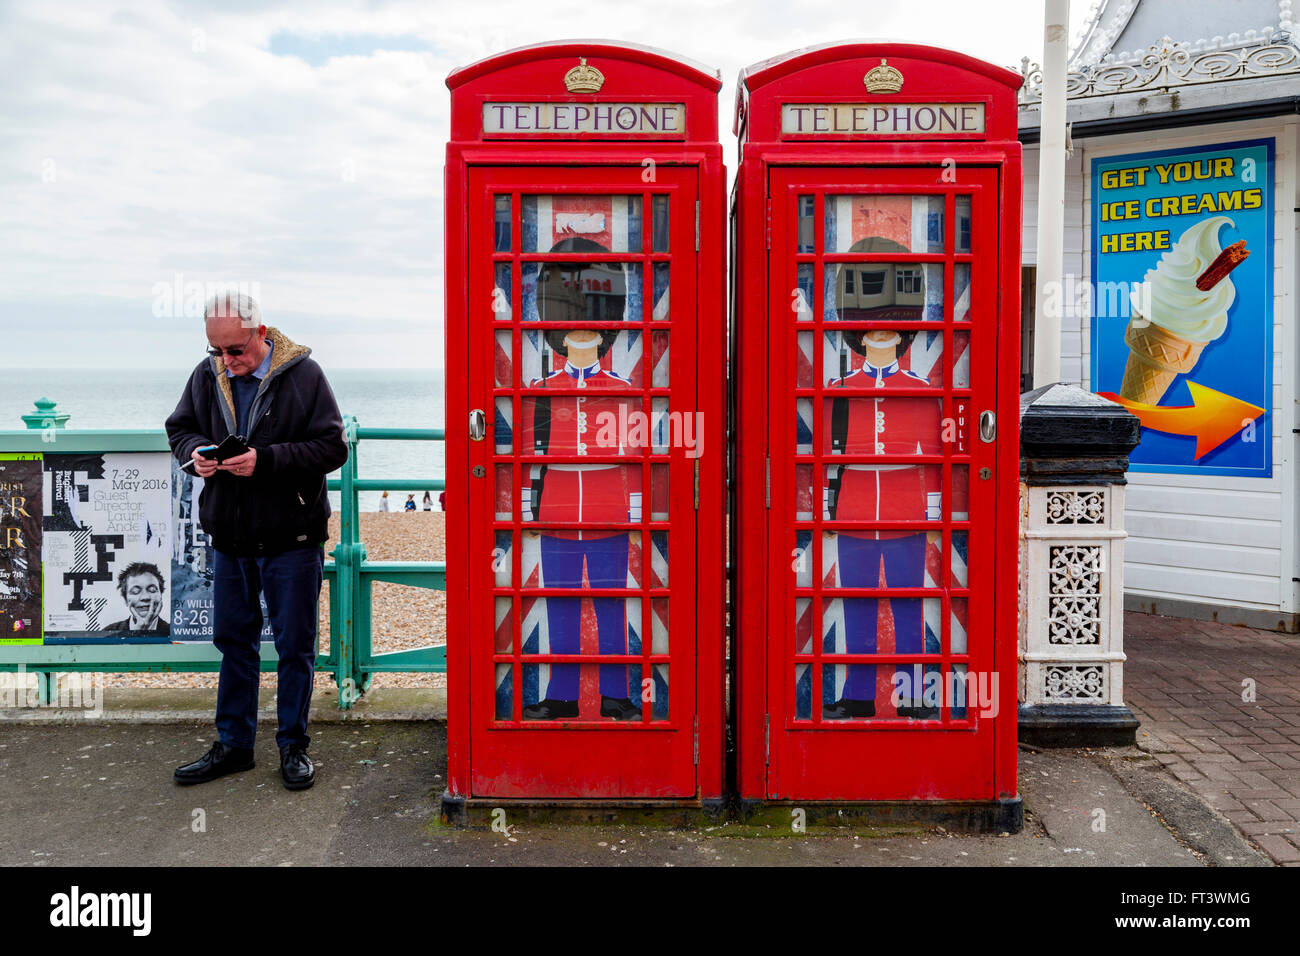 A Man Texts With A Smartphone Next To Two Traditional Red Telephone Boxes, Brighton, East Sussex, UK Stock Photo